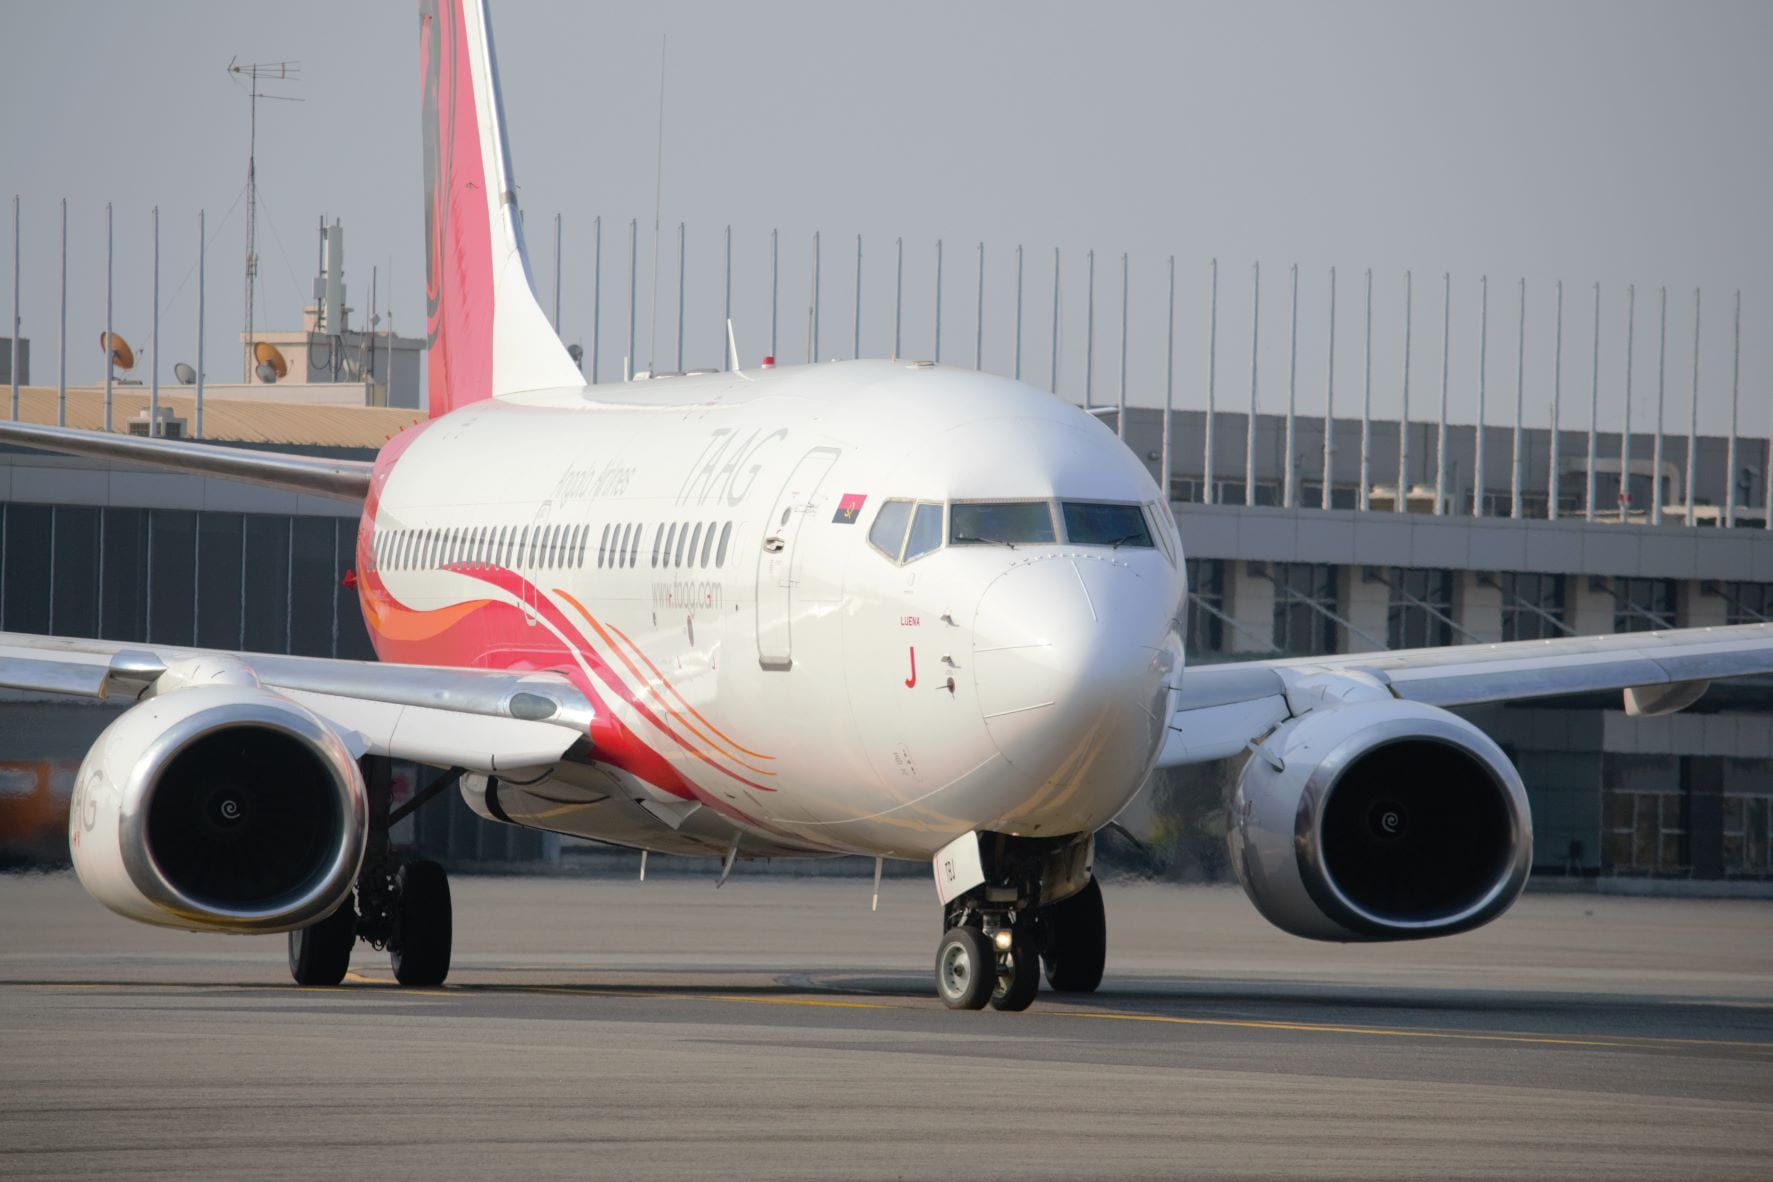 TAAG Angola Airlines Boeing 737 taxiing at airport